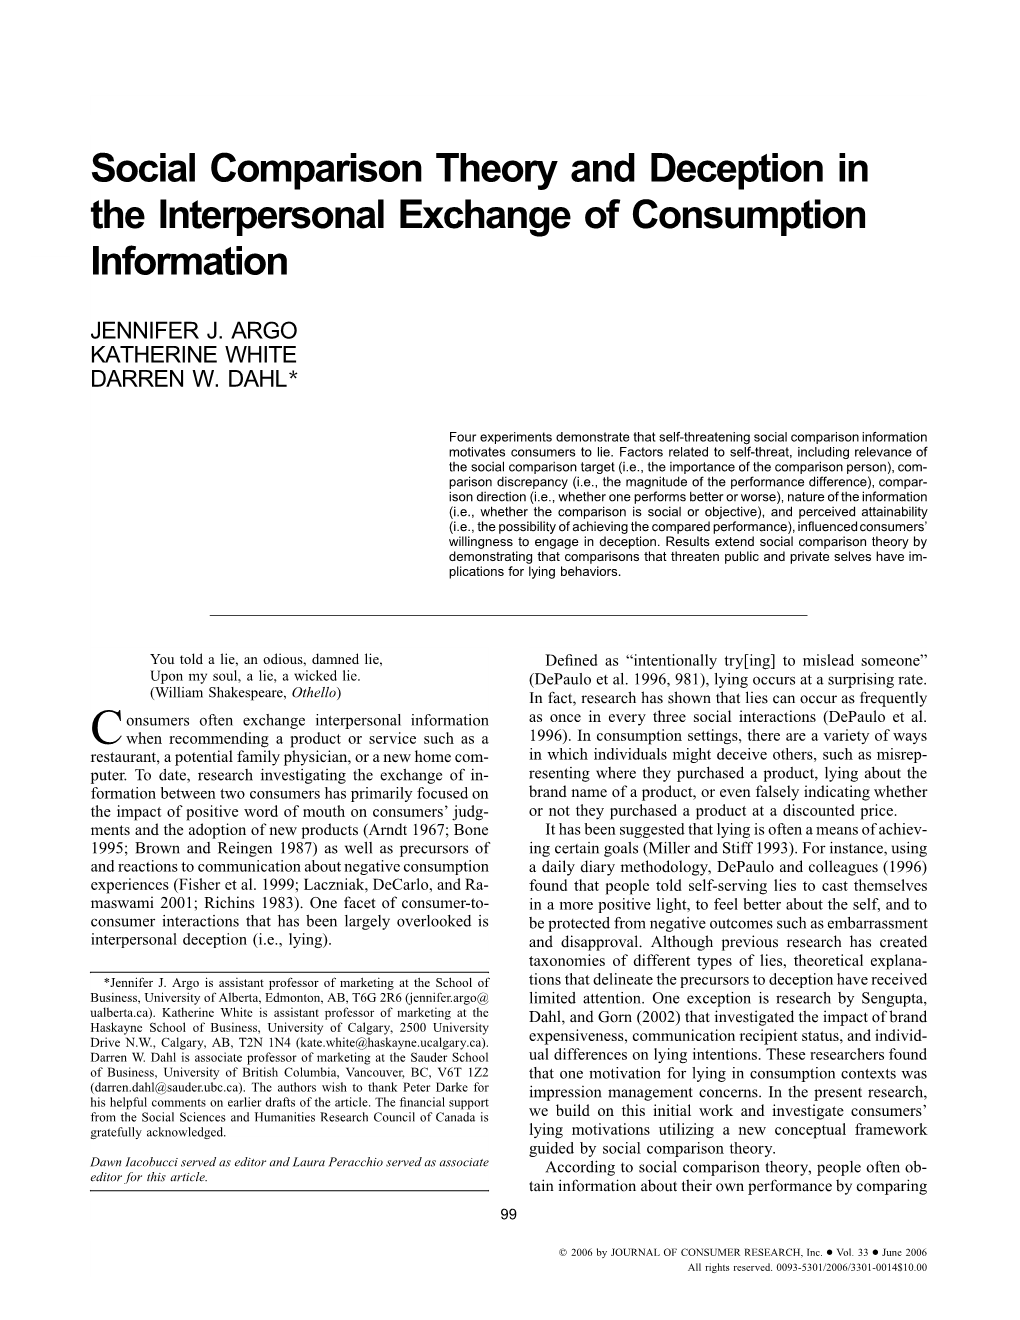 Social Comparison Theory and Deception in the Interpersonal Exchange of Consumption Information